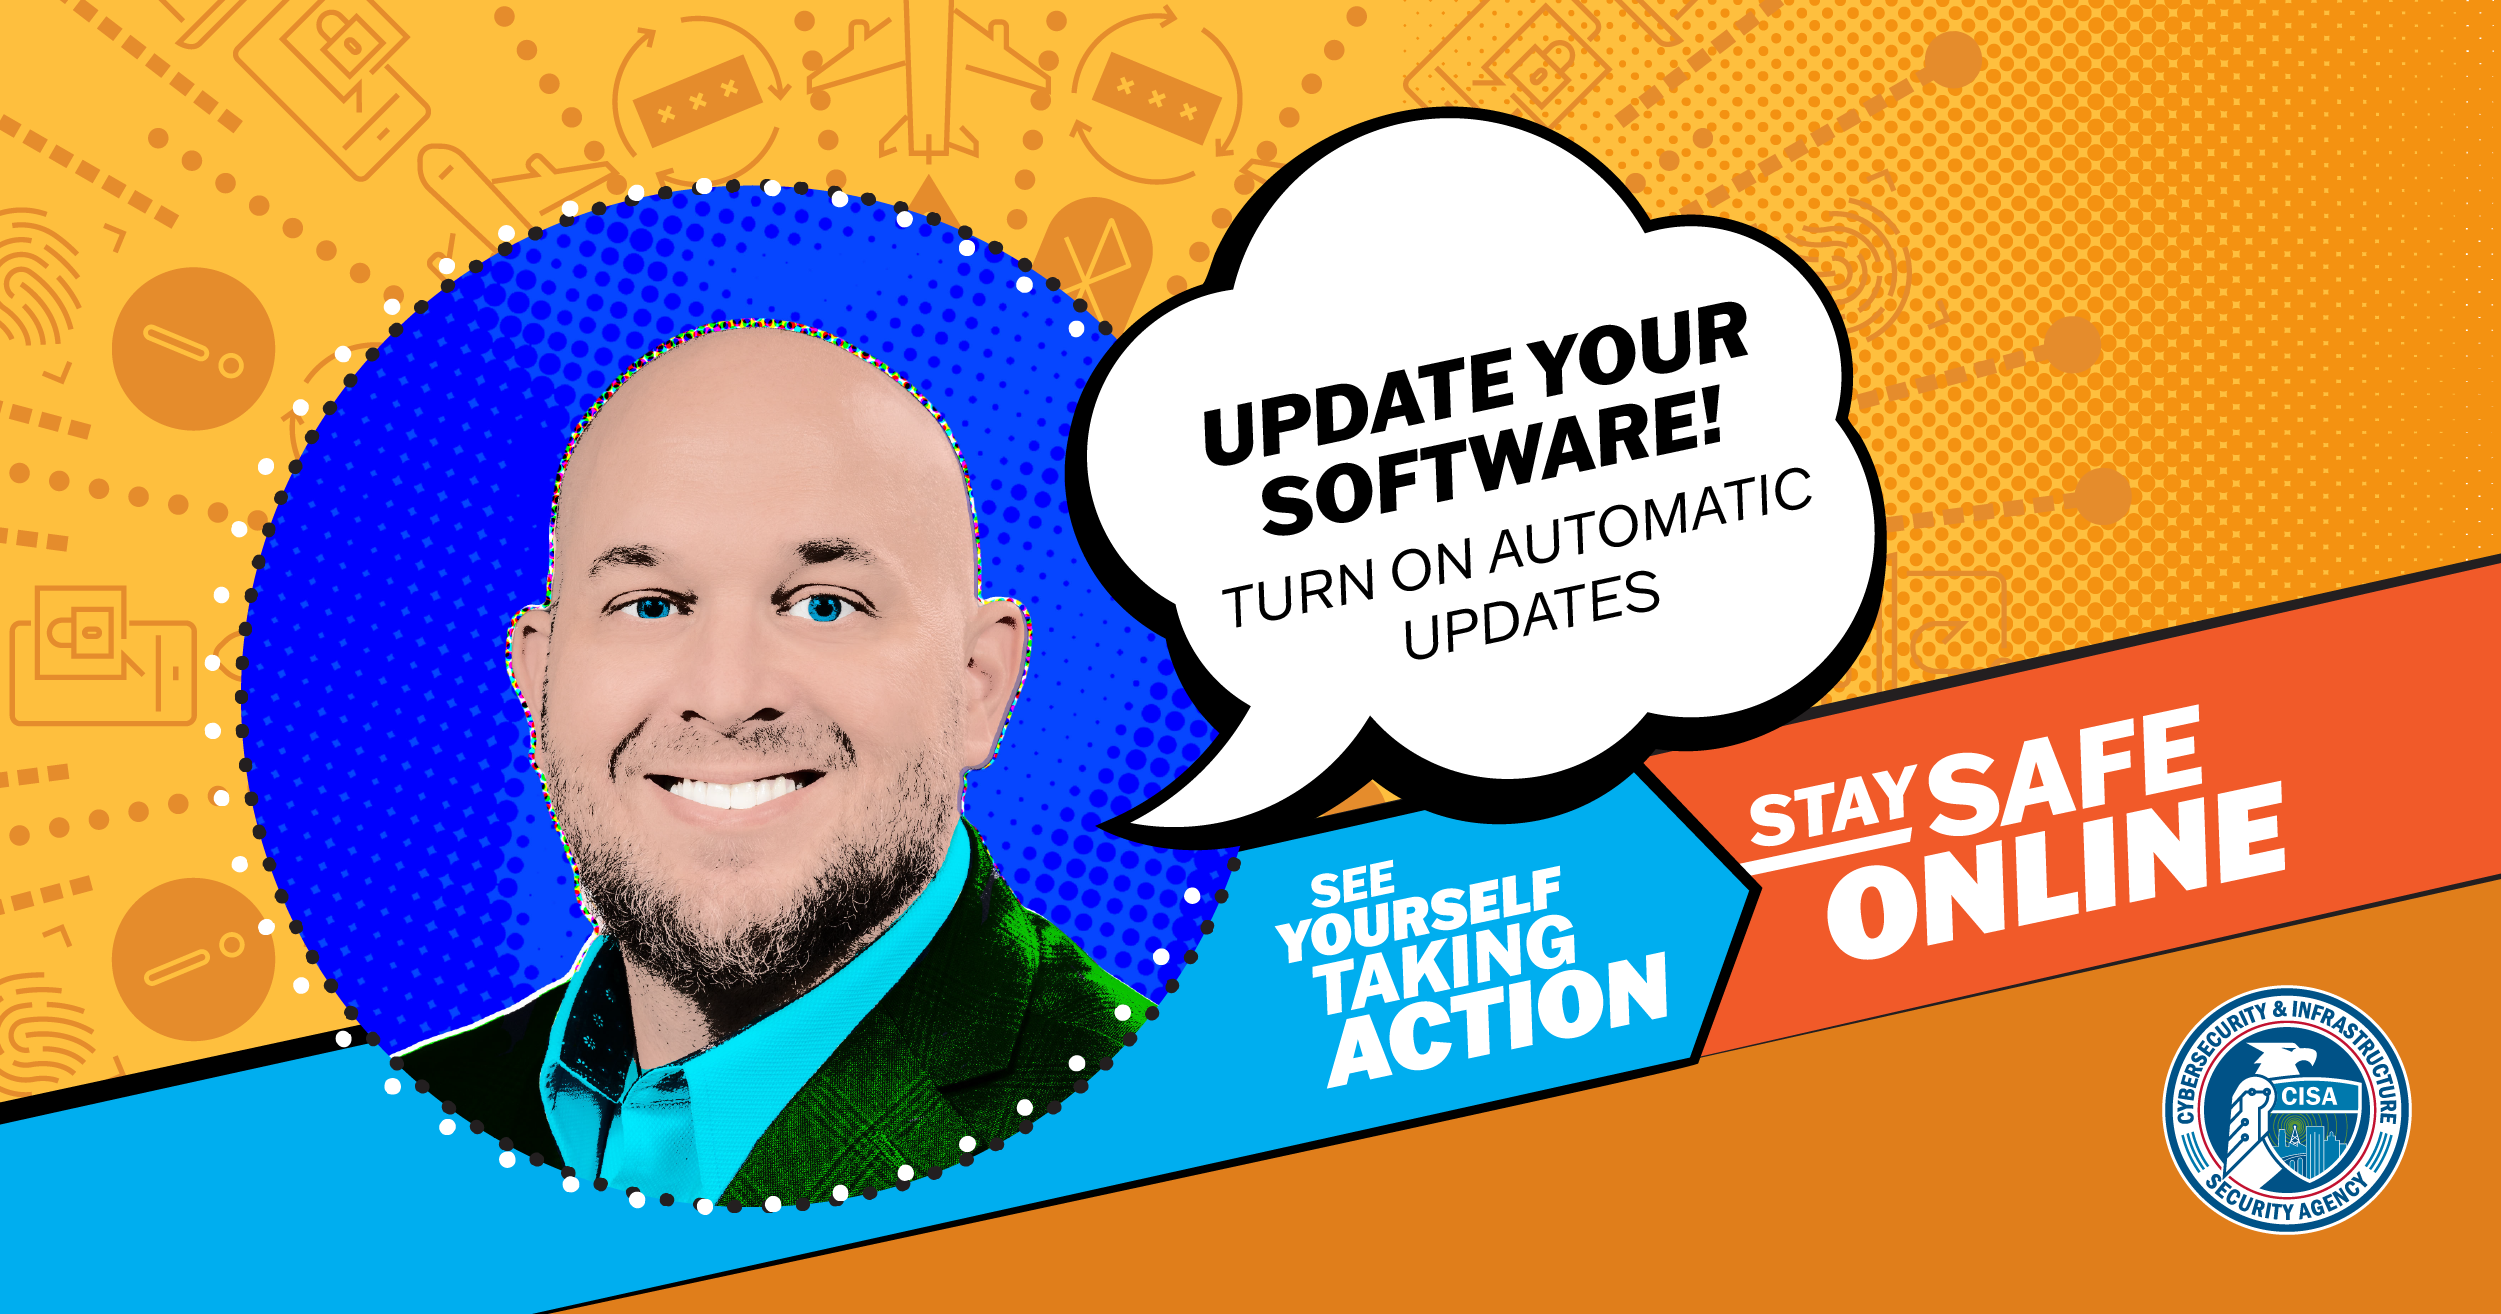 Update Your Software Turn on Automatic Updates. See Yourself Taking Action. Stay Safe Online